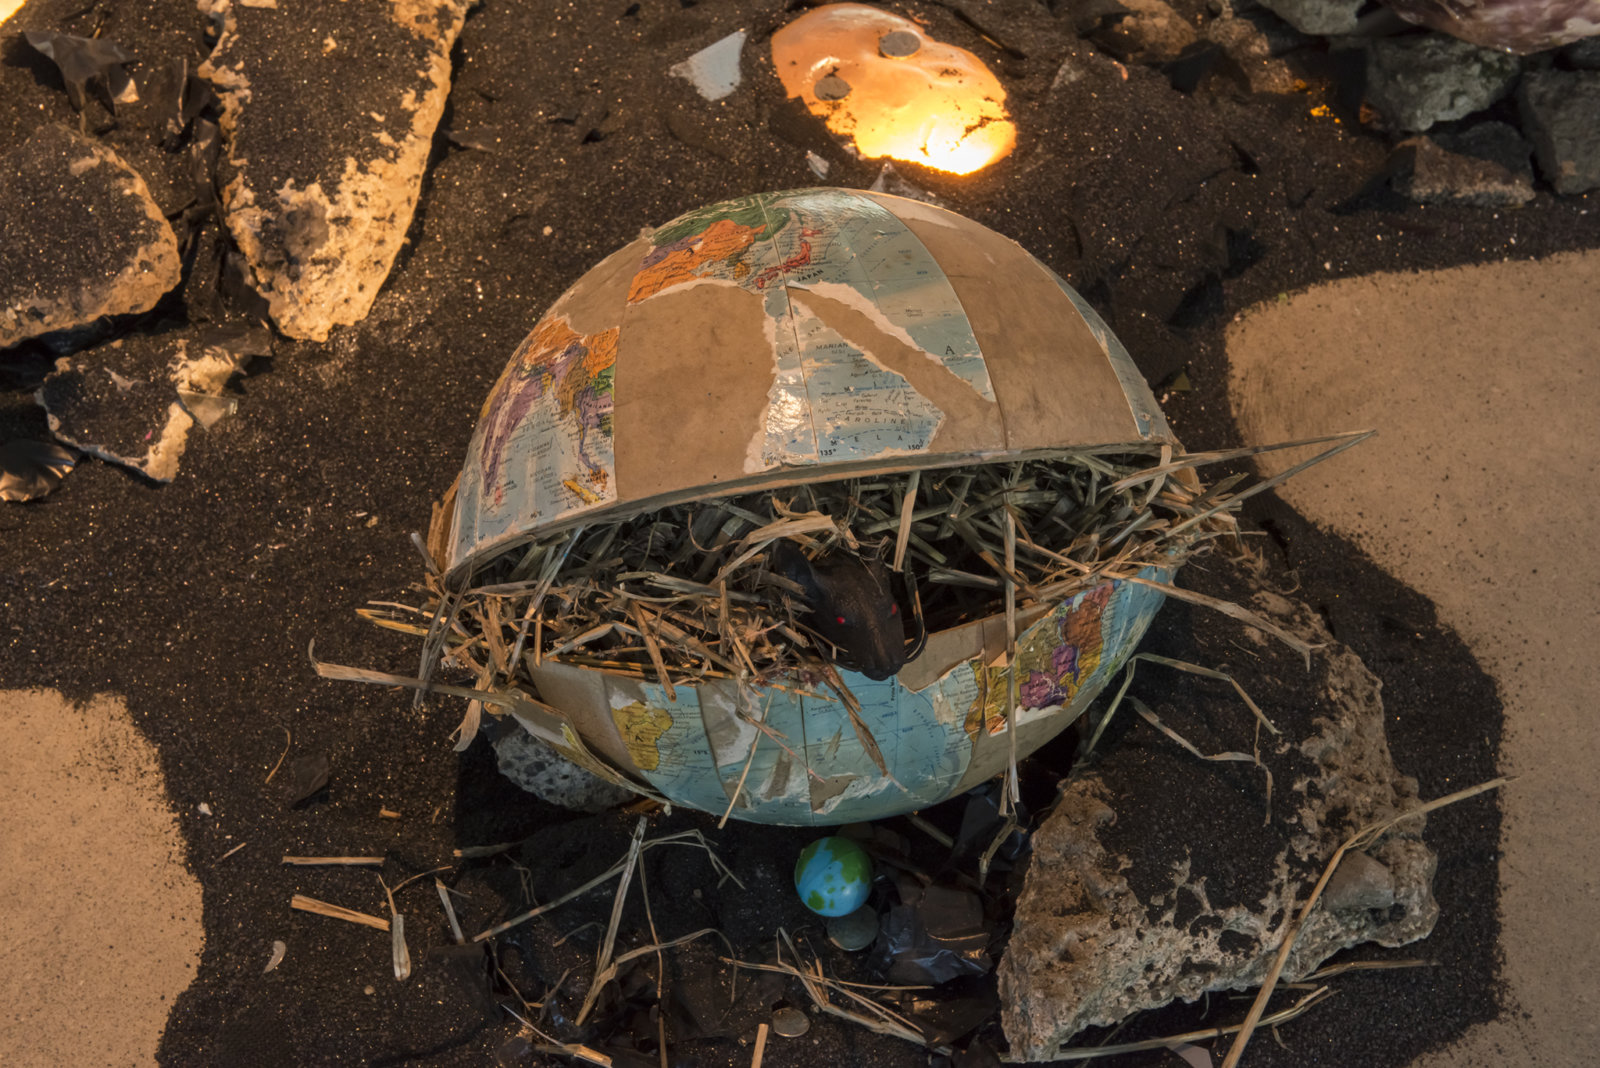 Kasper Feyrer, Device for sensing habitable zones (detail), 2018, copper slag, latex, wax, worbla, paper, fur, feather, amaranth seed, plaster, gelatin, gummies, globe, rat toy, hay, dried weeds, silicone, wire mesh, coins, mineral rocks, fused glass faces, rocks, concrete, motor, 136 x 109 x 108 in. (354 x 277 x 274 cm)